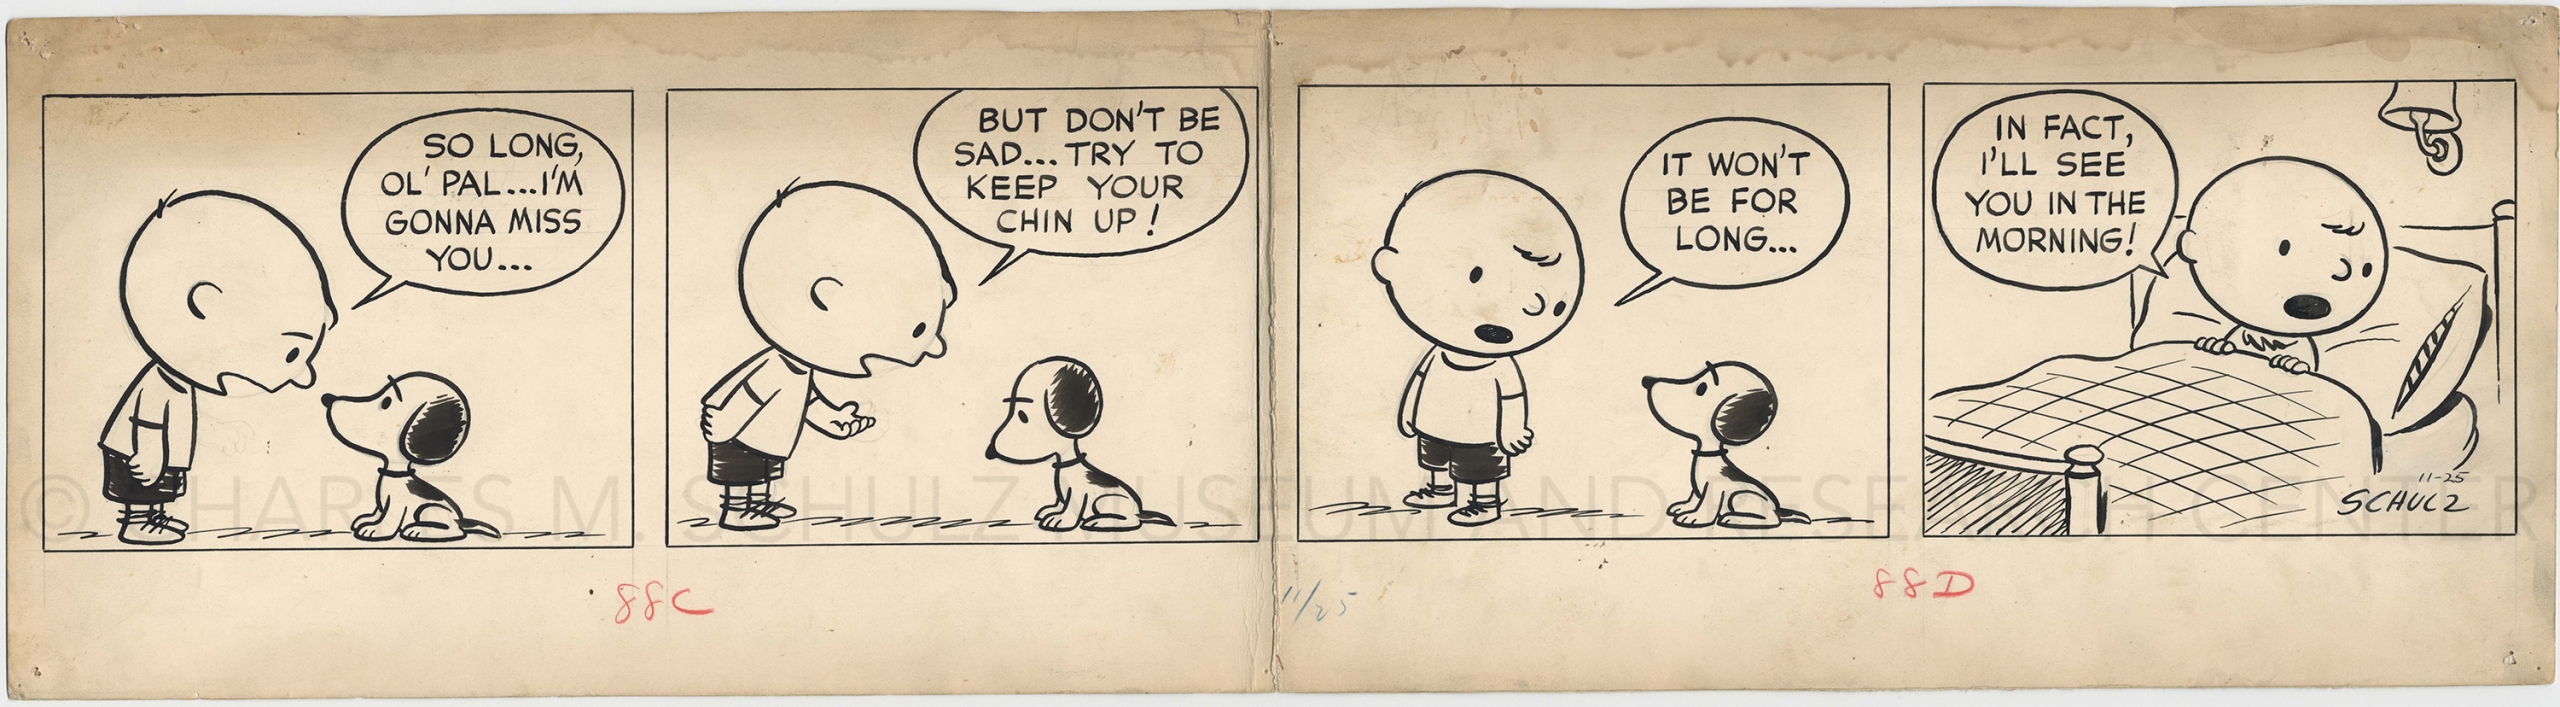 70 Years of Peanuts - Charles M. Schulz Museum